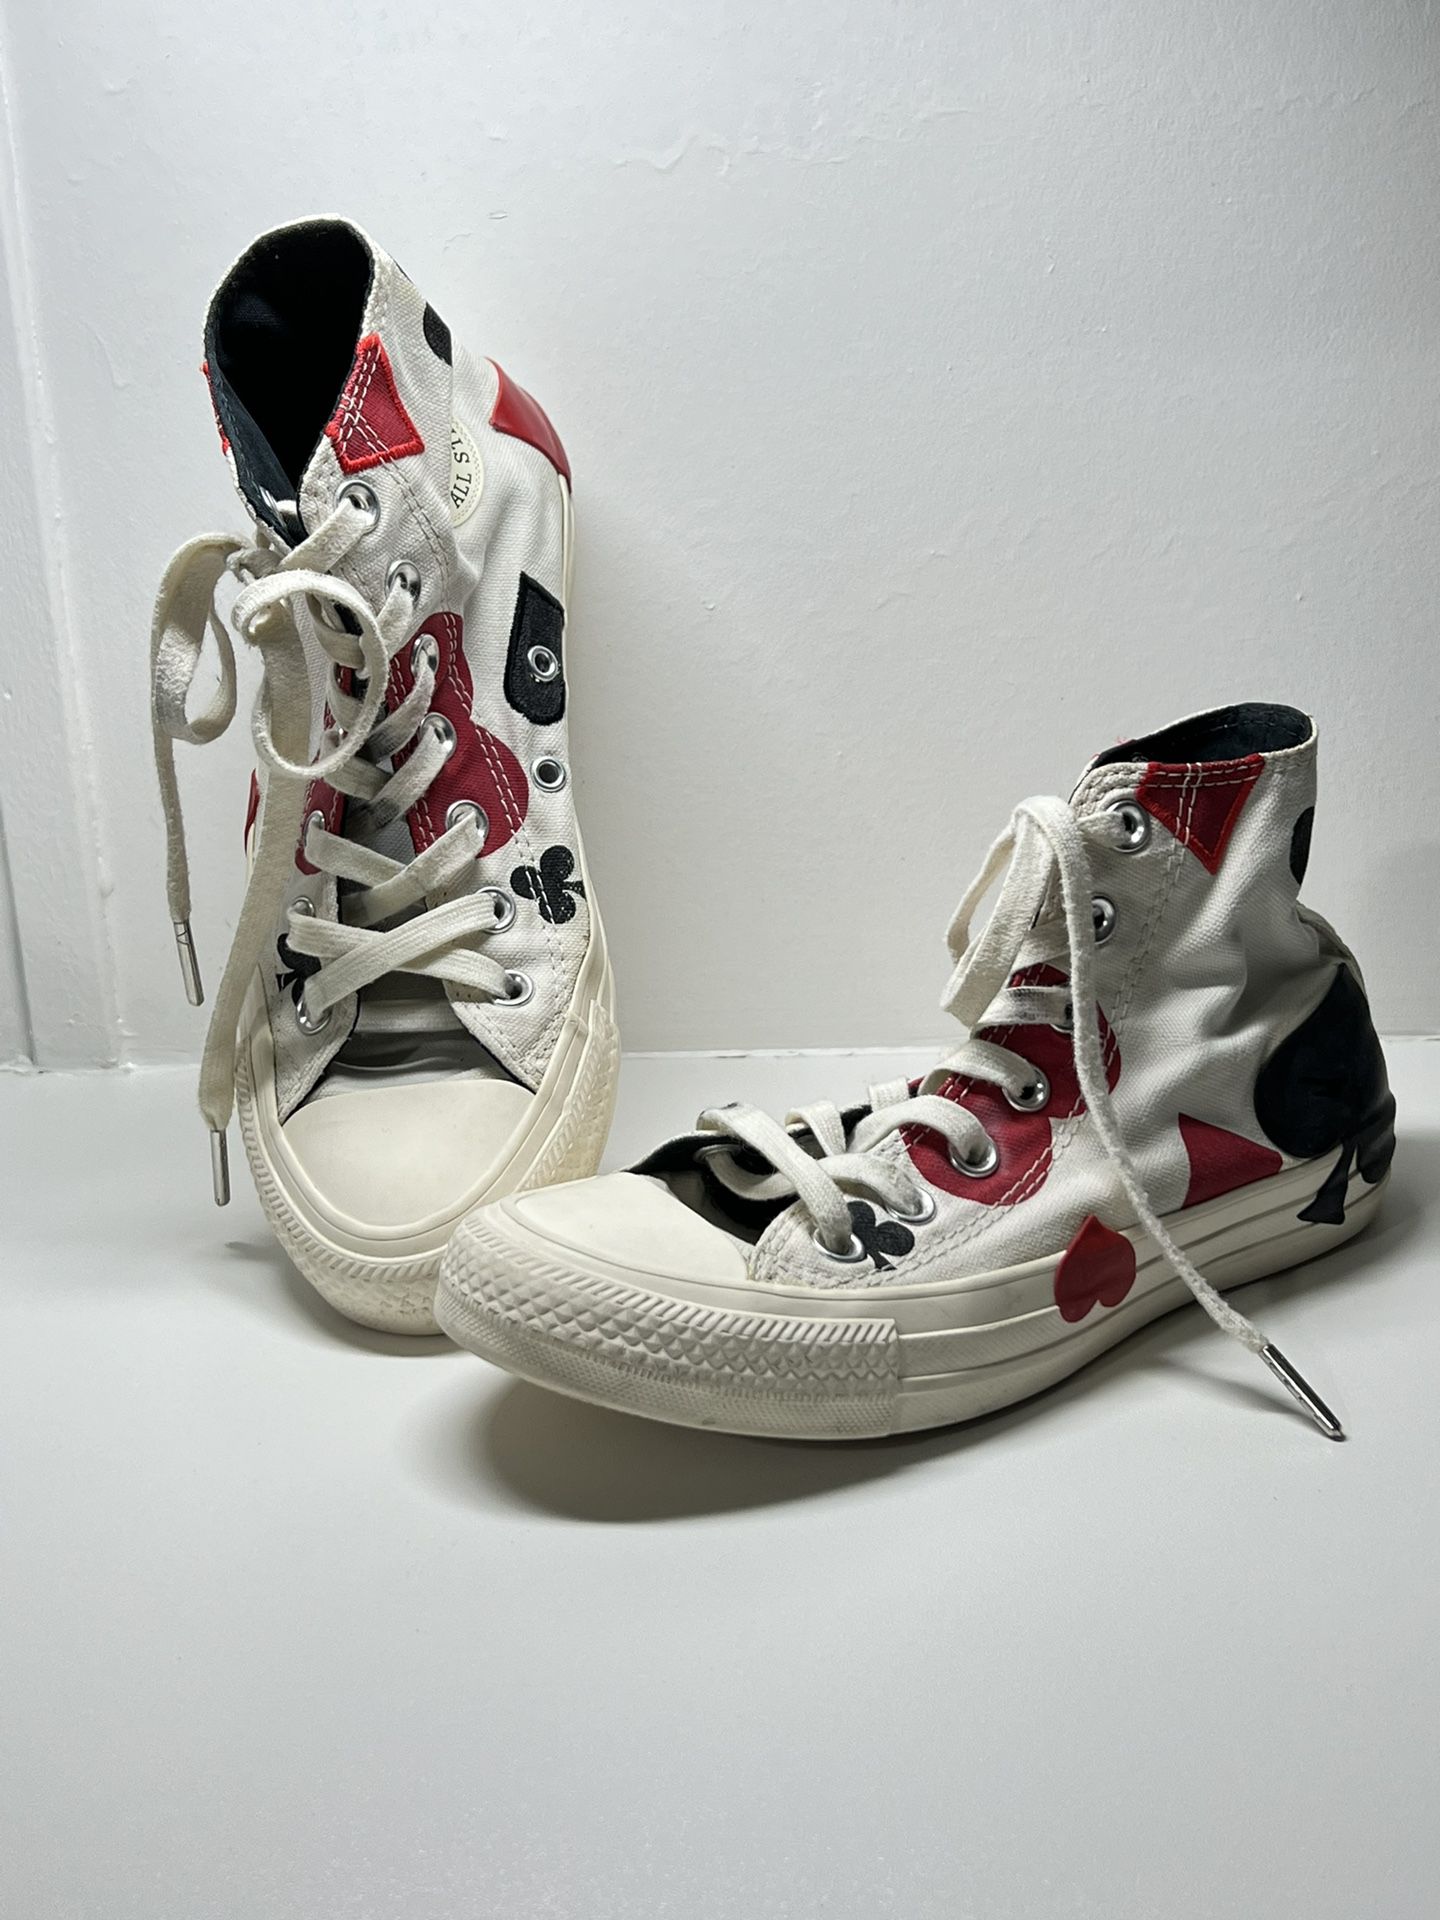 Converse Chuck Taylor All Star Queen of Hearts Hi-Top Sneakers Womens 5.5  Fair condition 